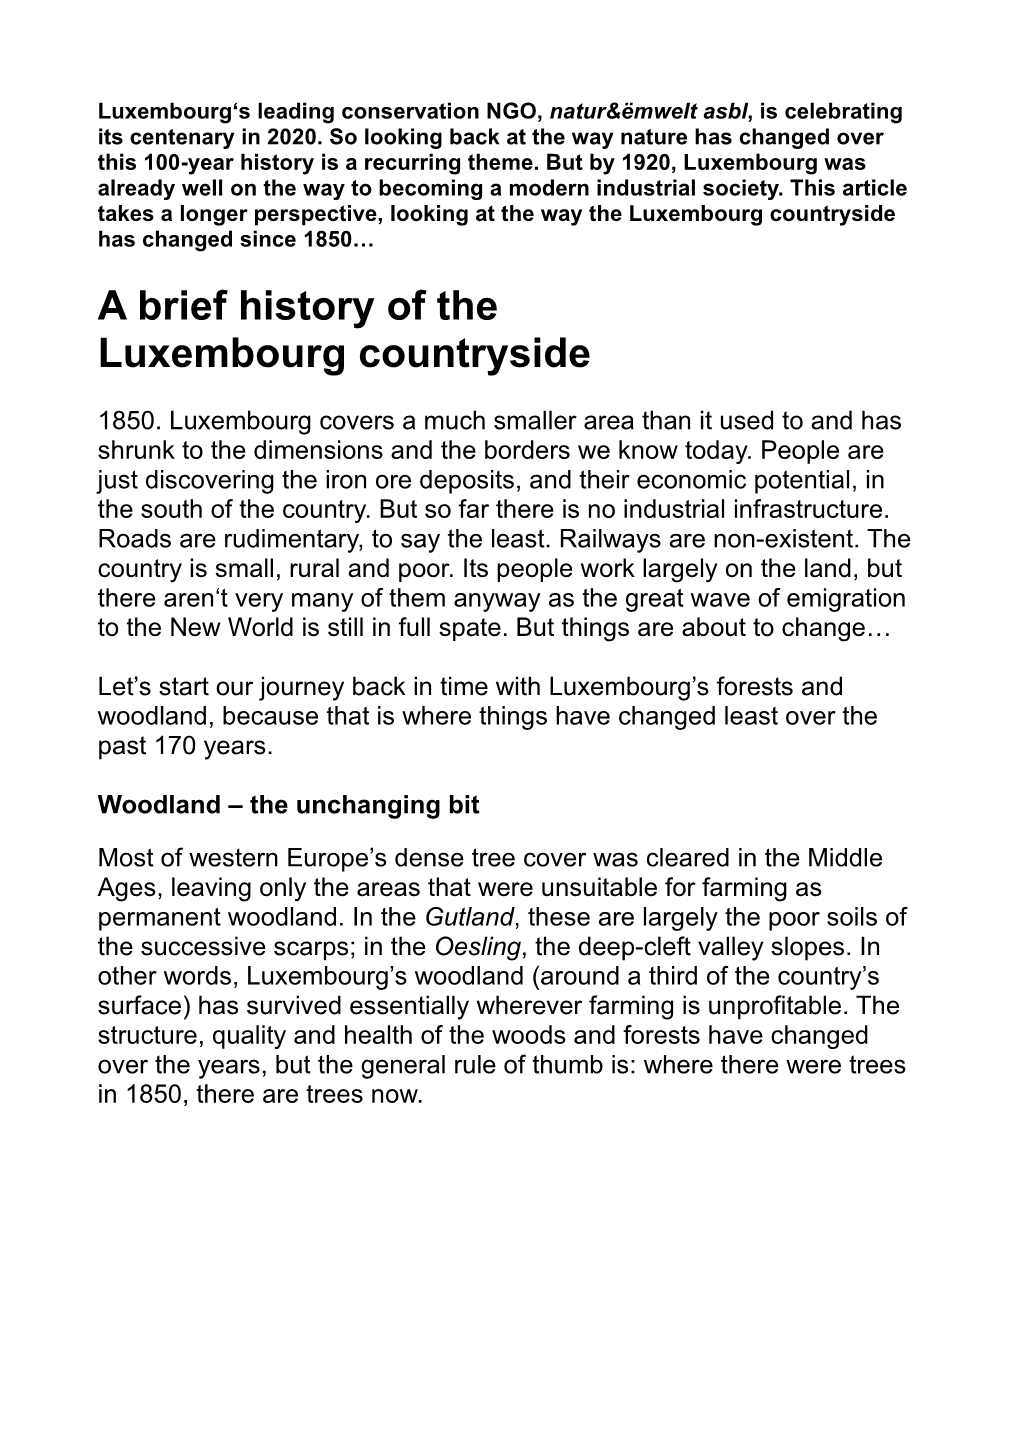 A Brief History of the Luxembourg Countryside